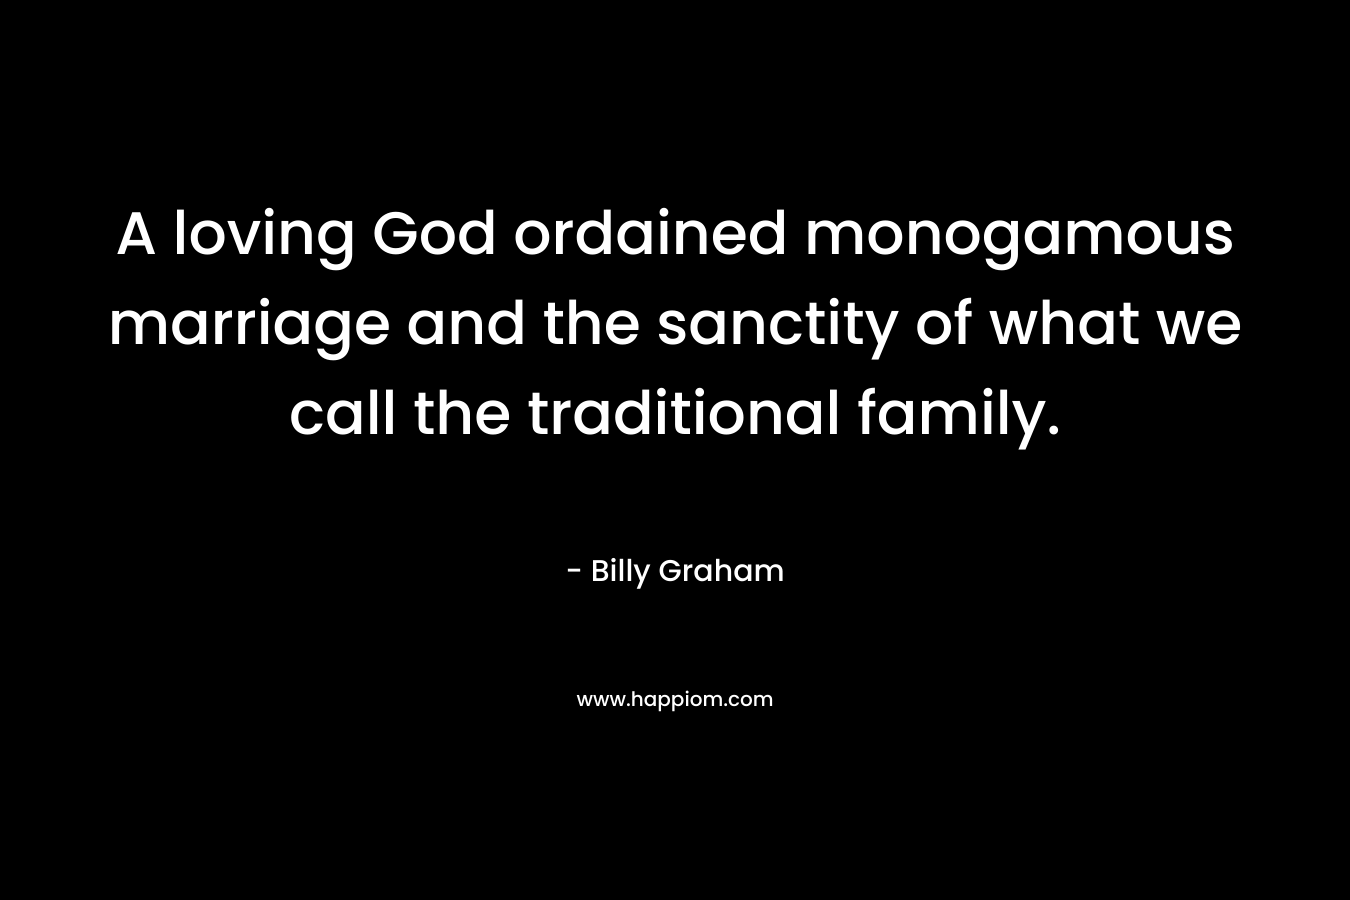 A loving God ordained monogamous marriage and the sanctity of what we call the traditional family.